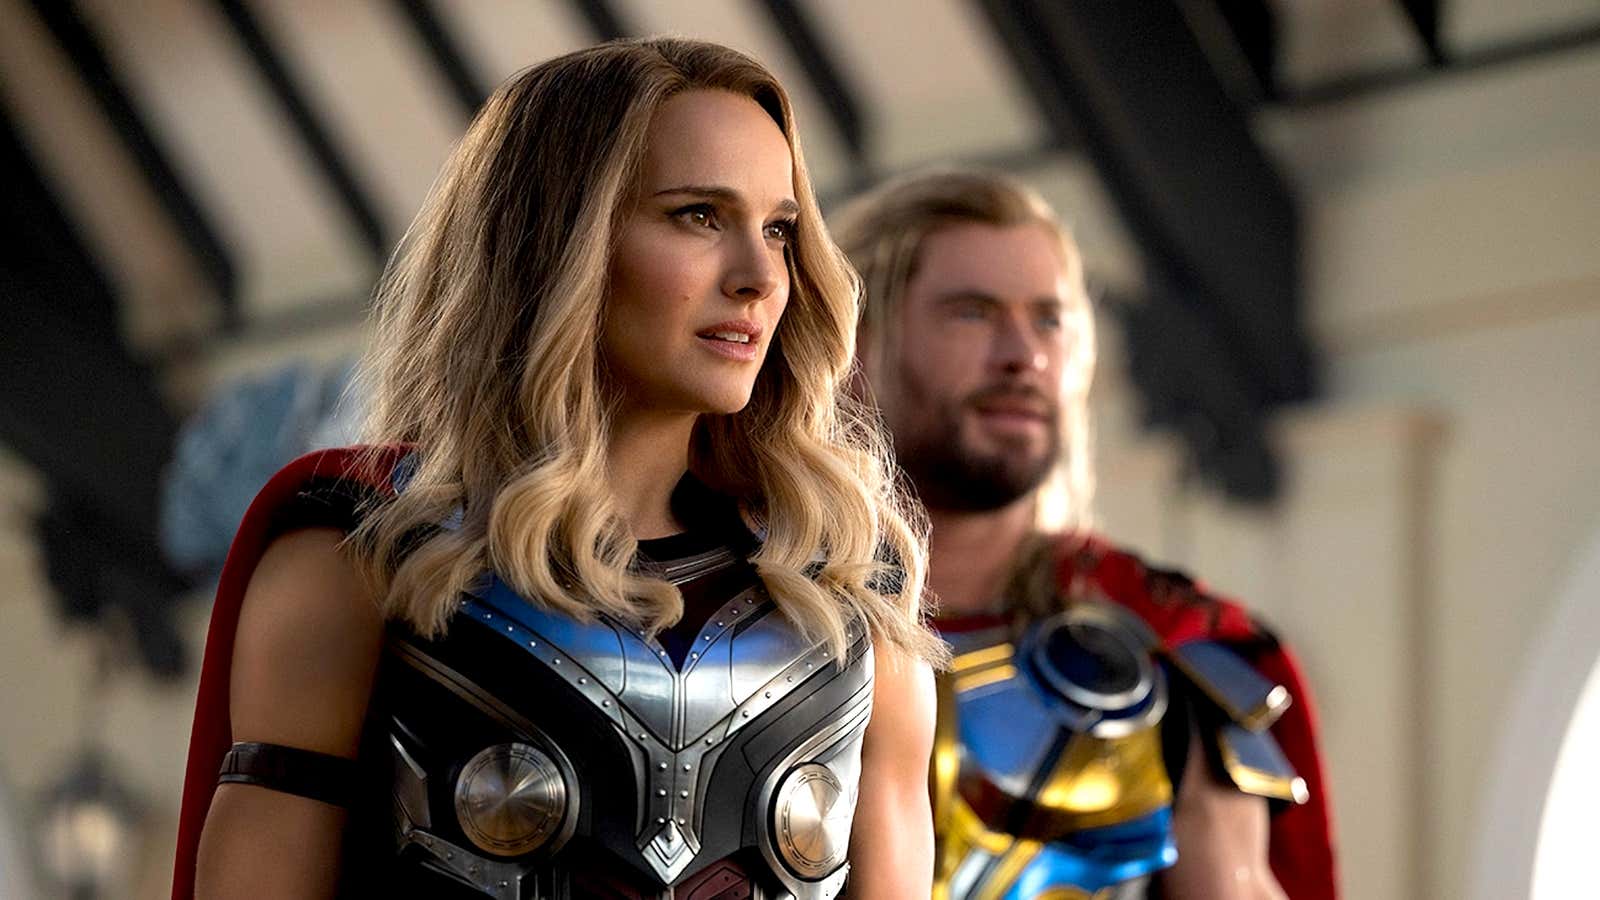 Natalie Portman and Chris Hemsworth in a scene from “Thor: Love and Thunder”